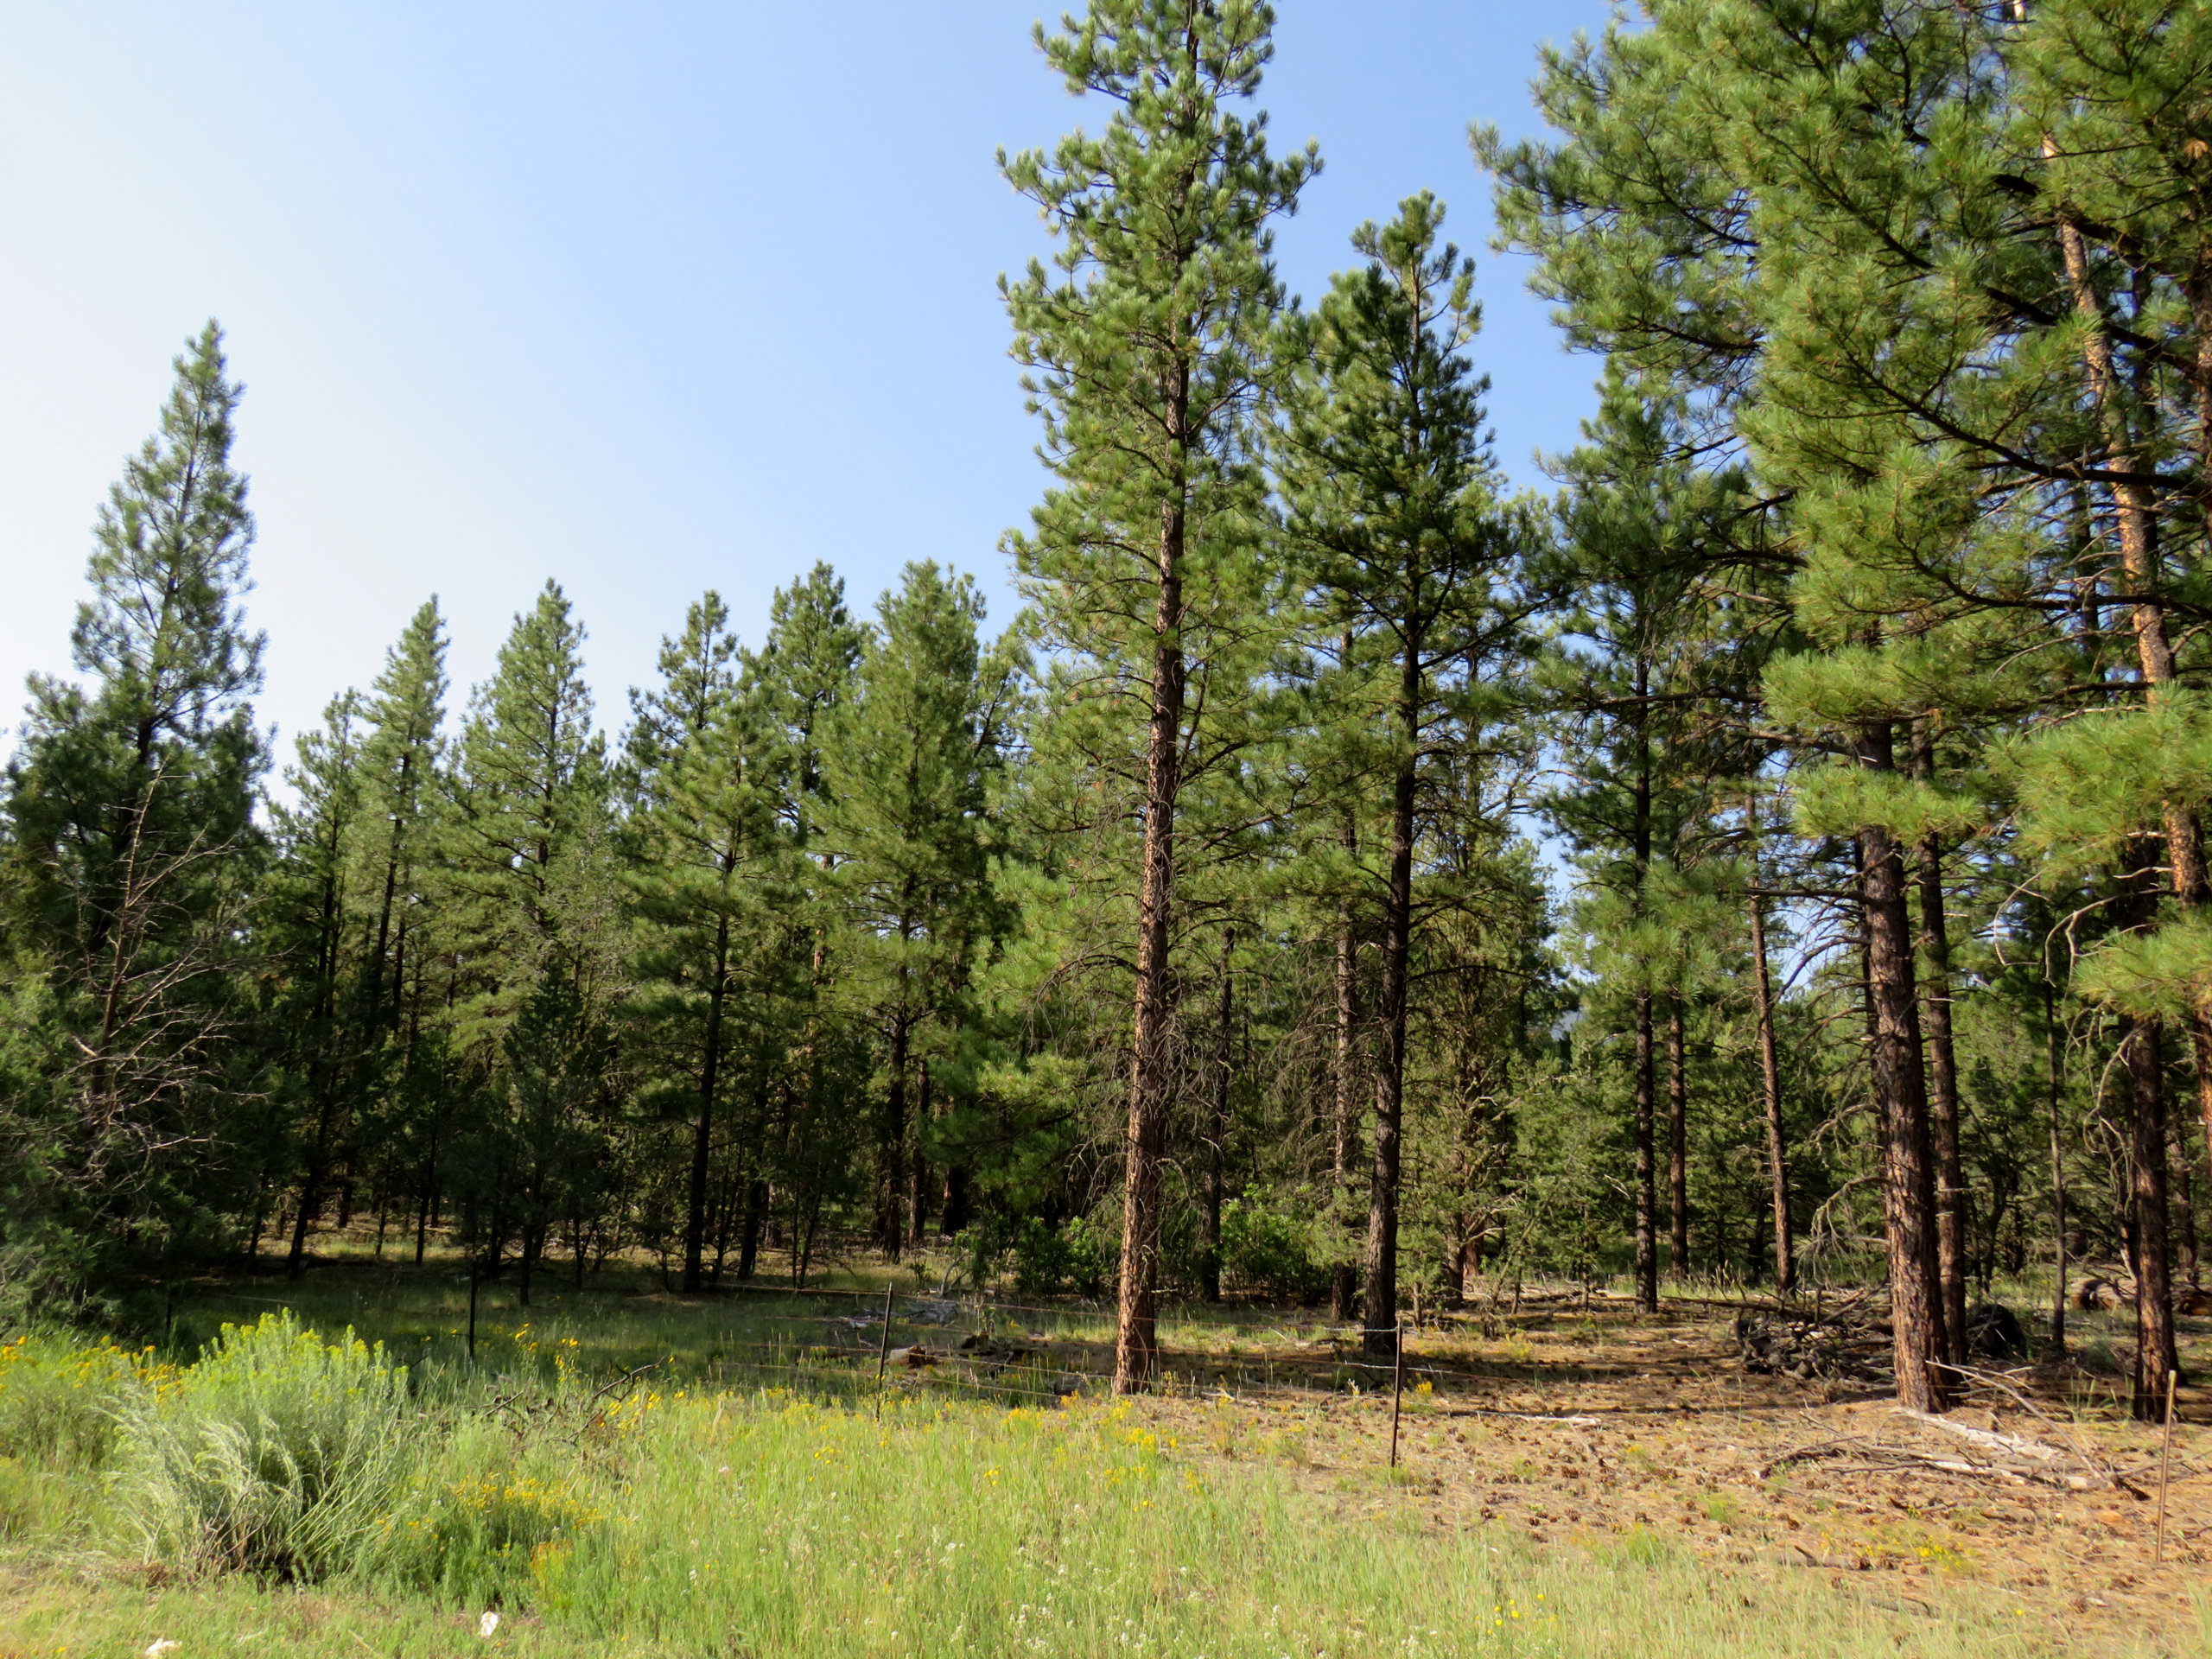 Reforestation center legislation passes first committee unanimously